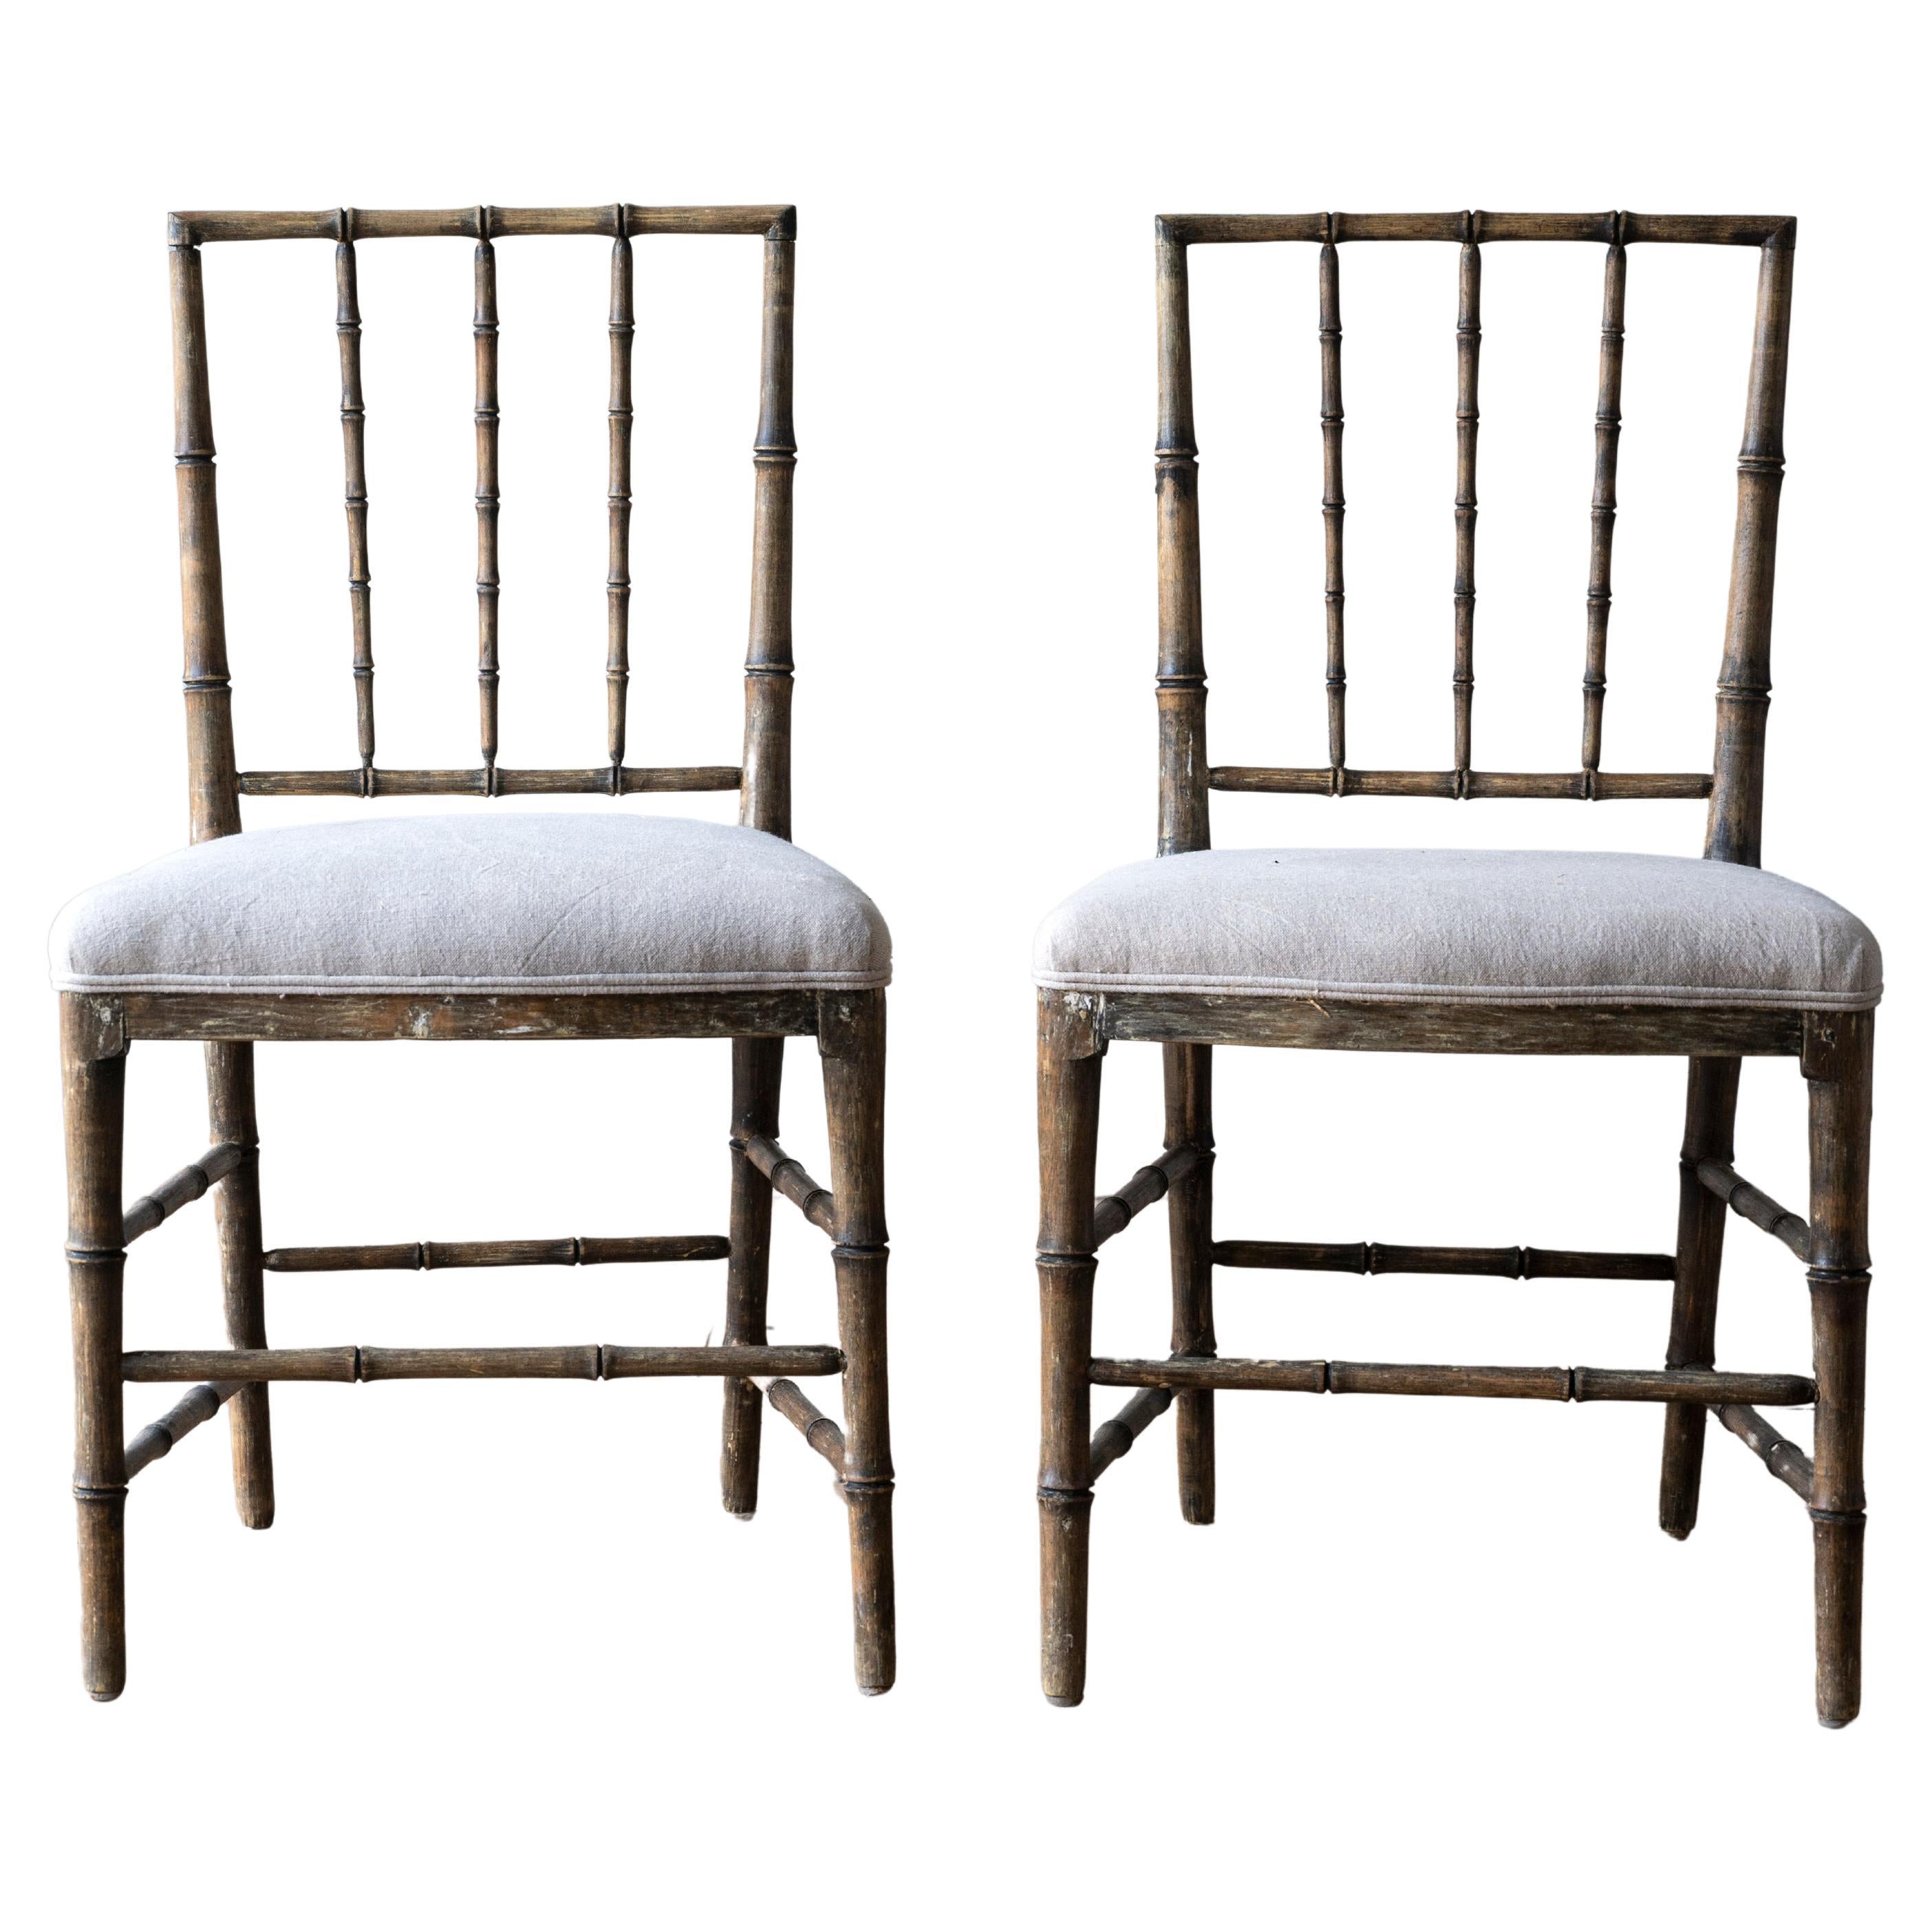 Rare pair of 19th Century Gustavian Faux Bamboo Chairs For Sale